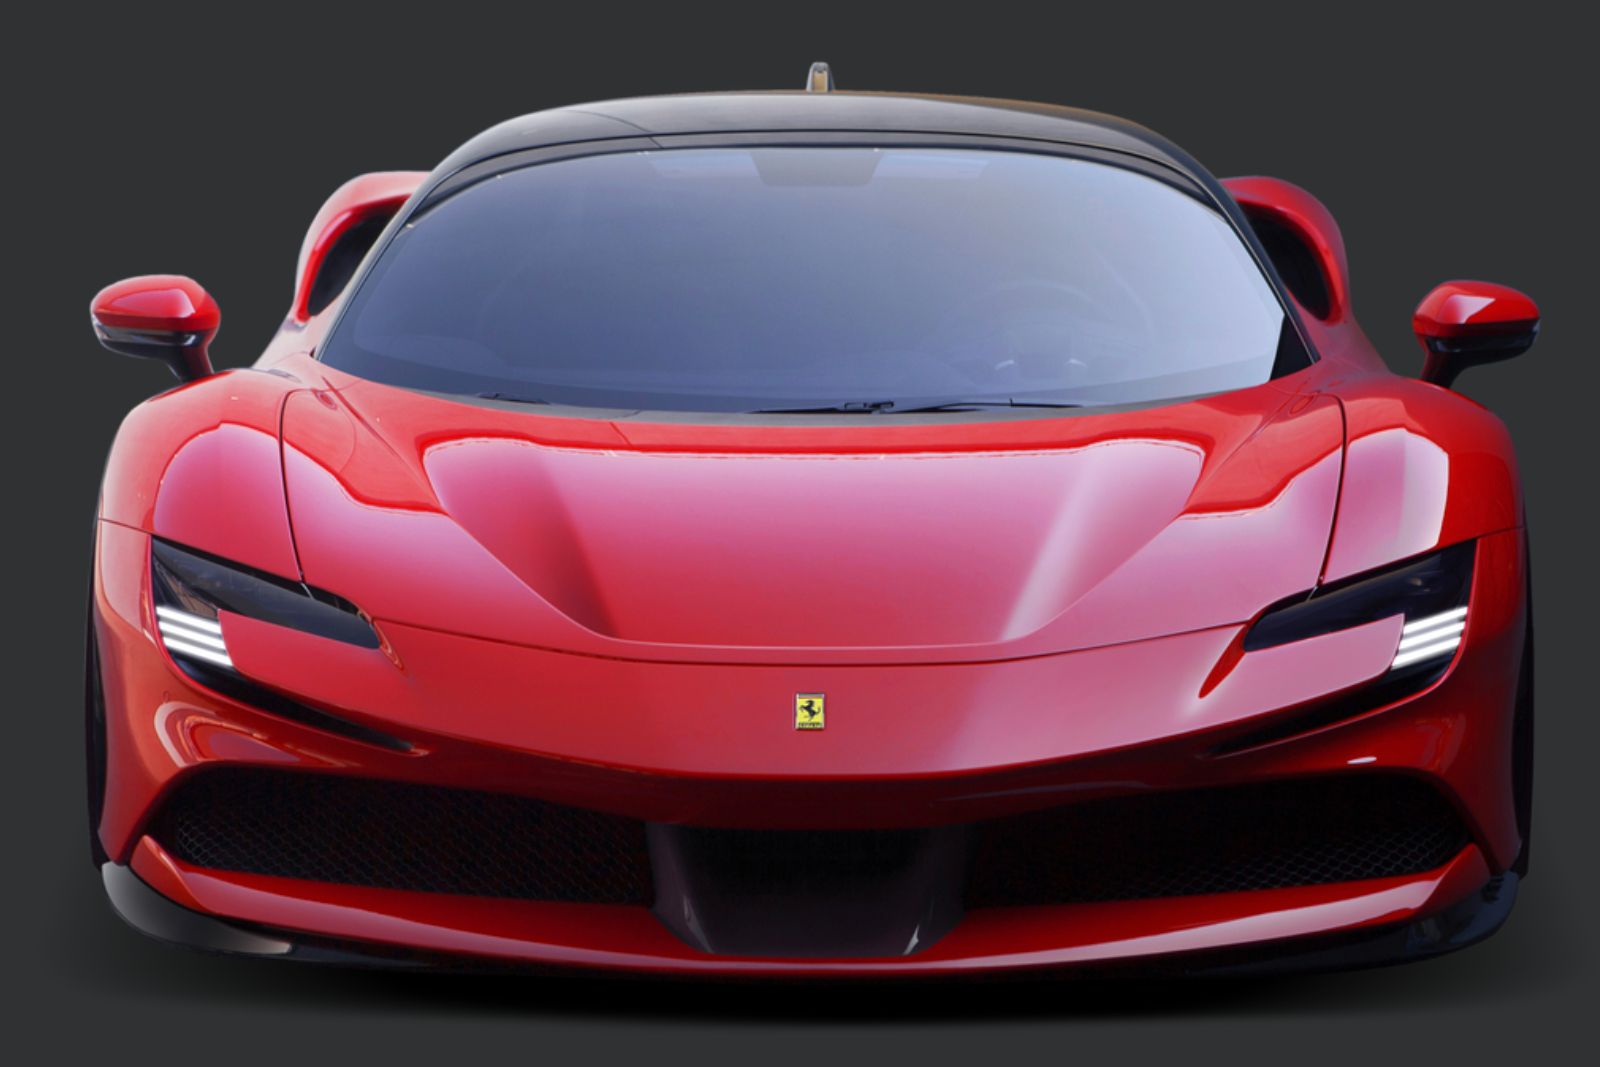 Ferrari has launched its first plug-in hybrid the blazing fast SF90 Stradale image 1